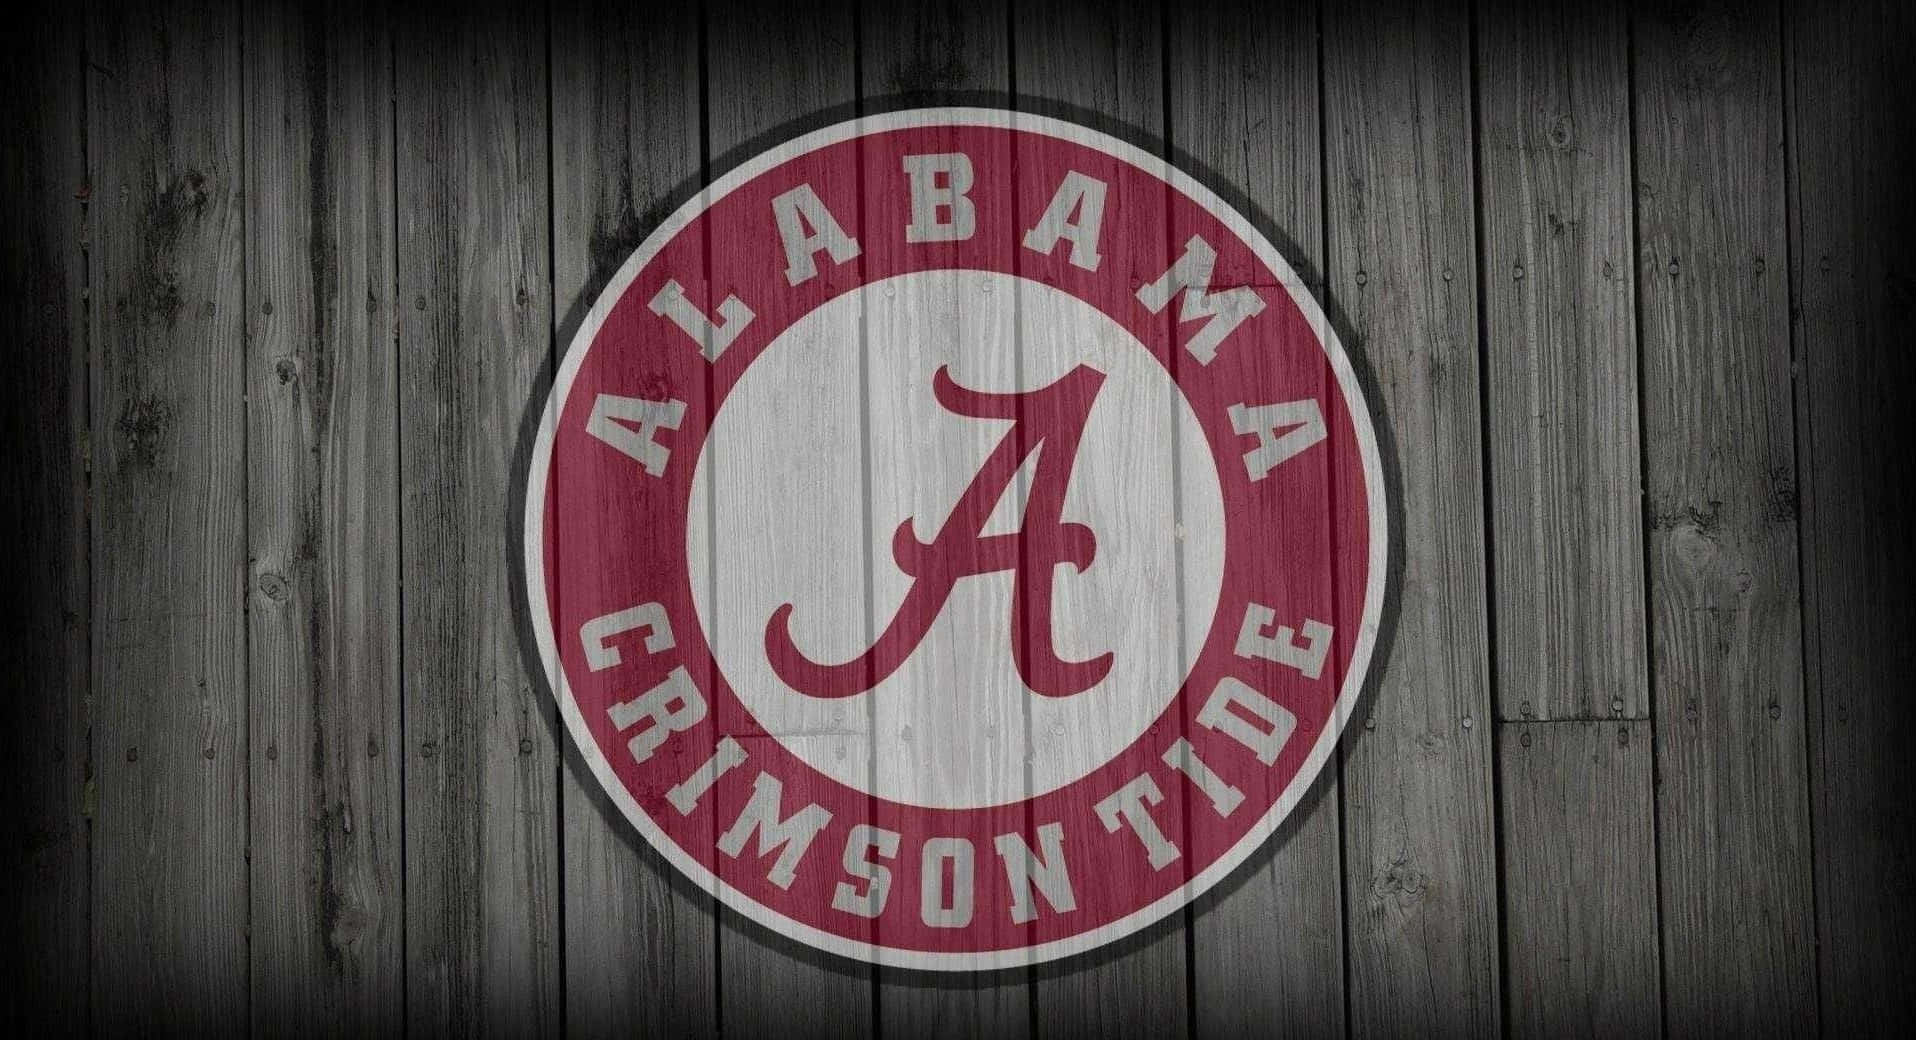 The Crimson Tide of Alabama Continues to Roll on and on.